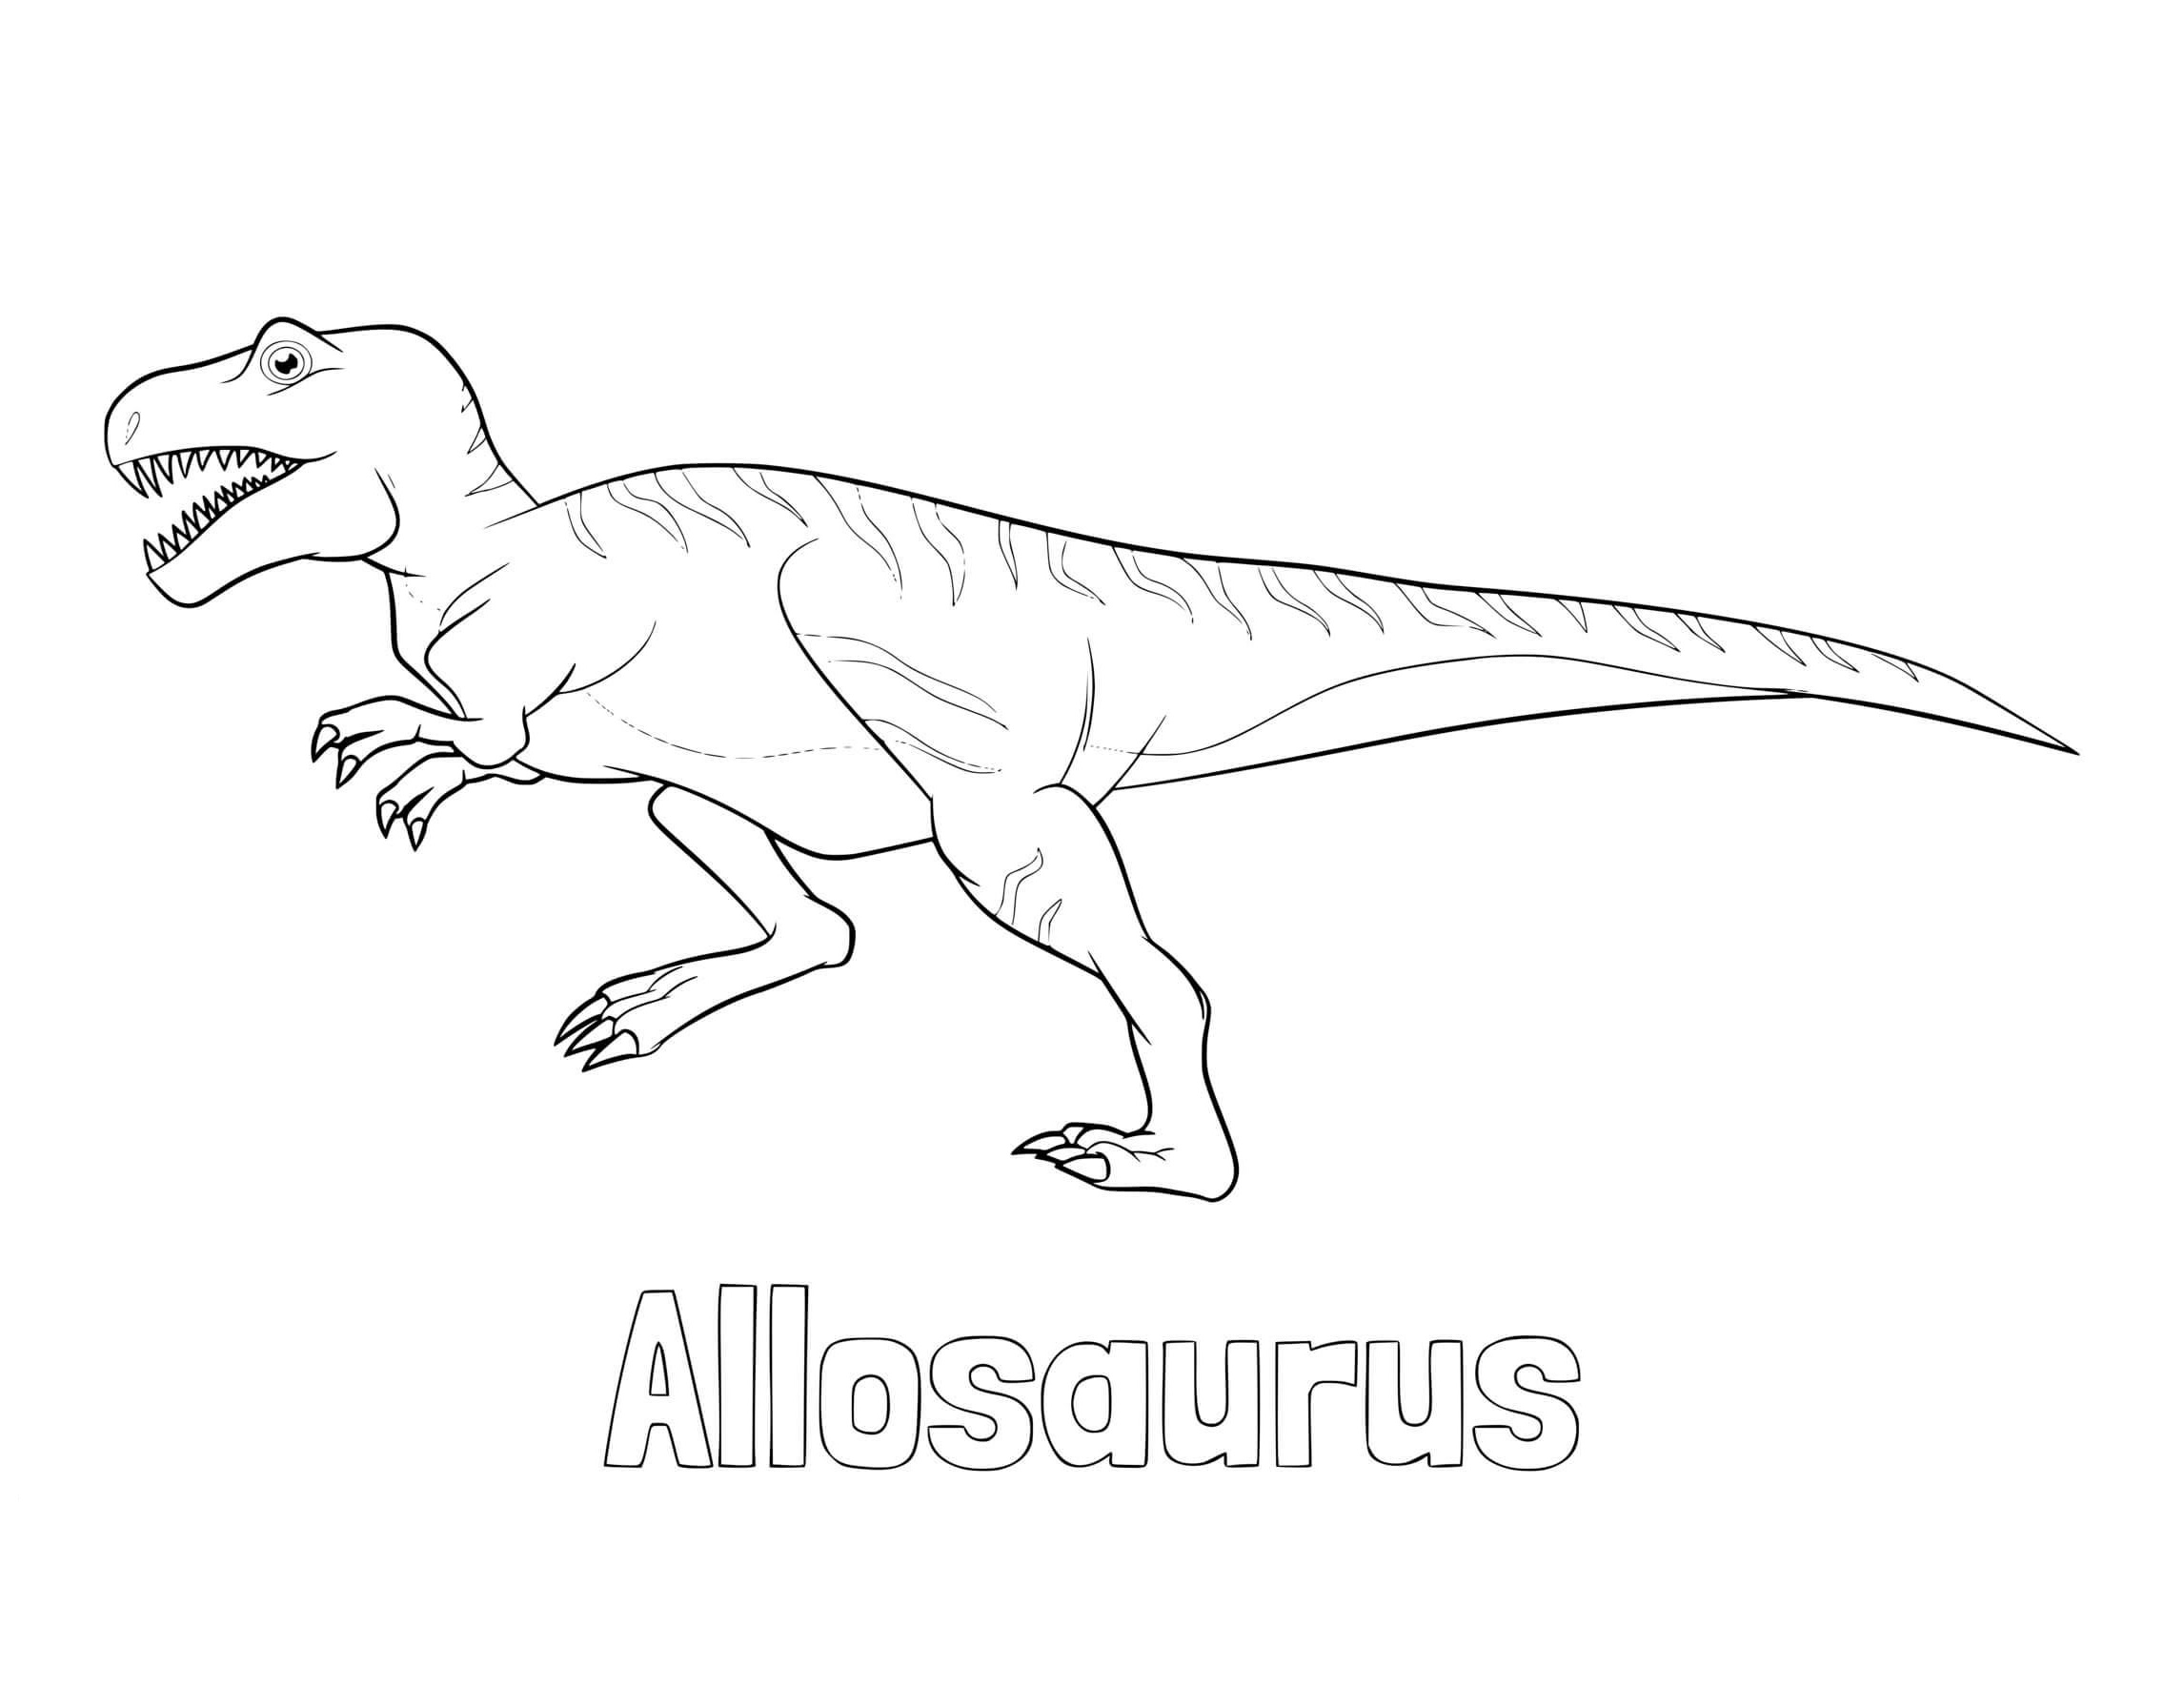 allosaurus coloring pages to print